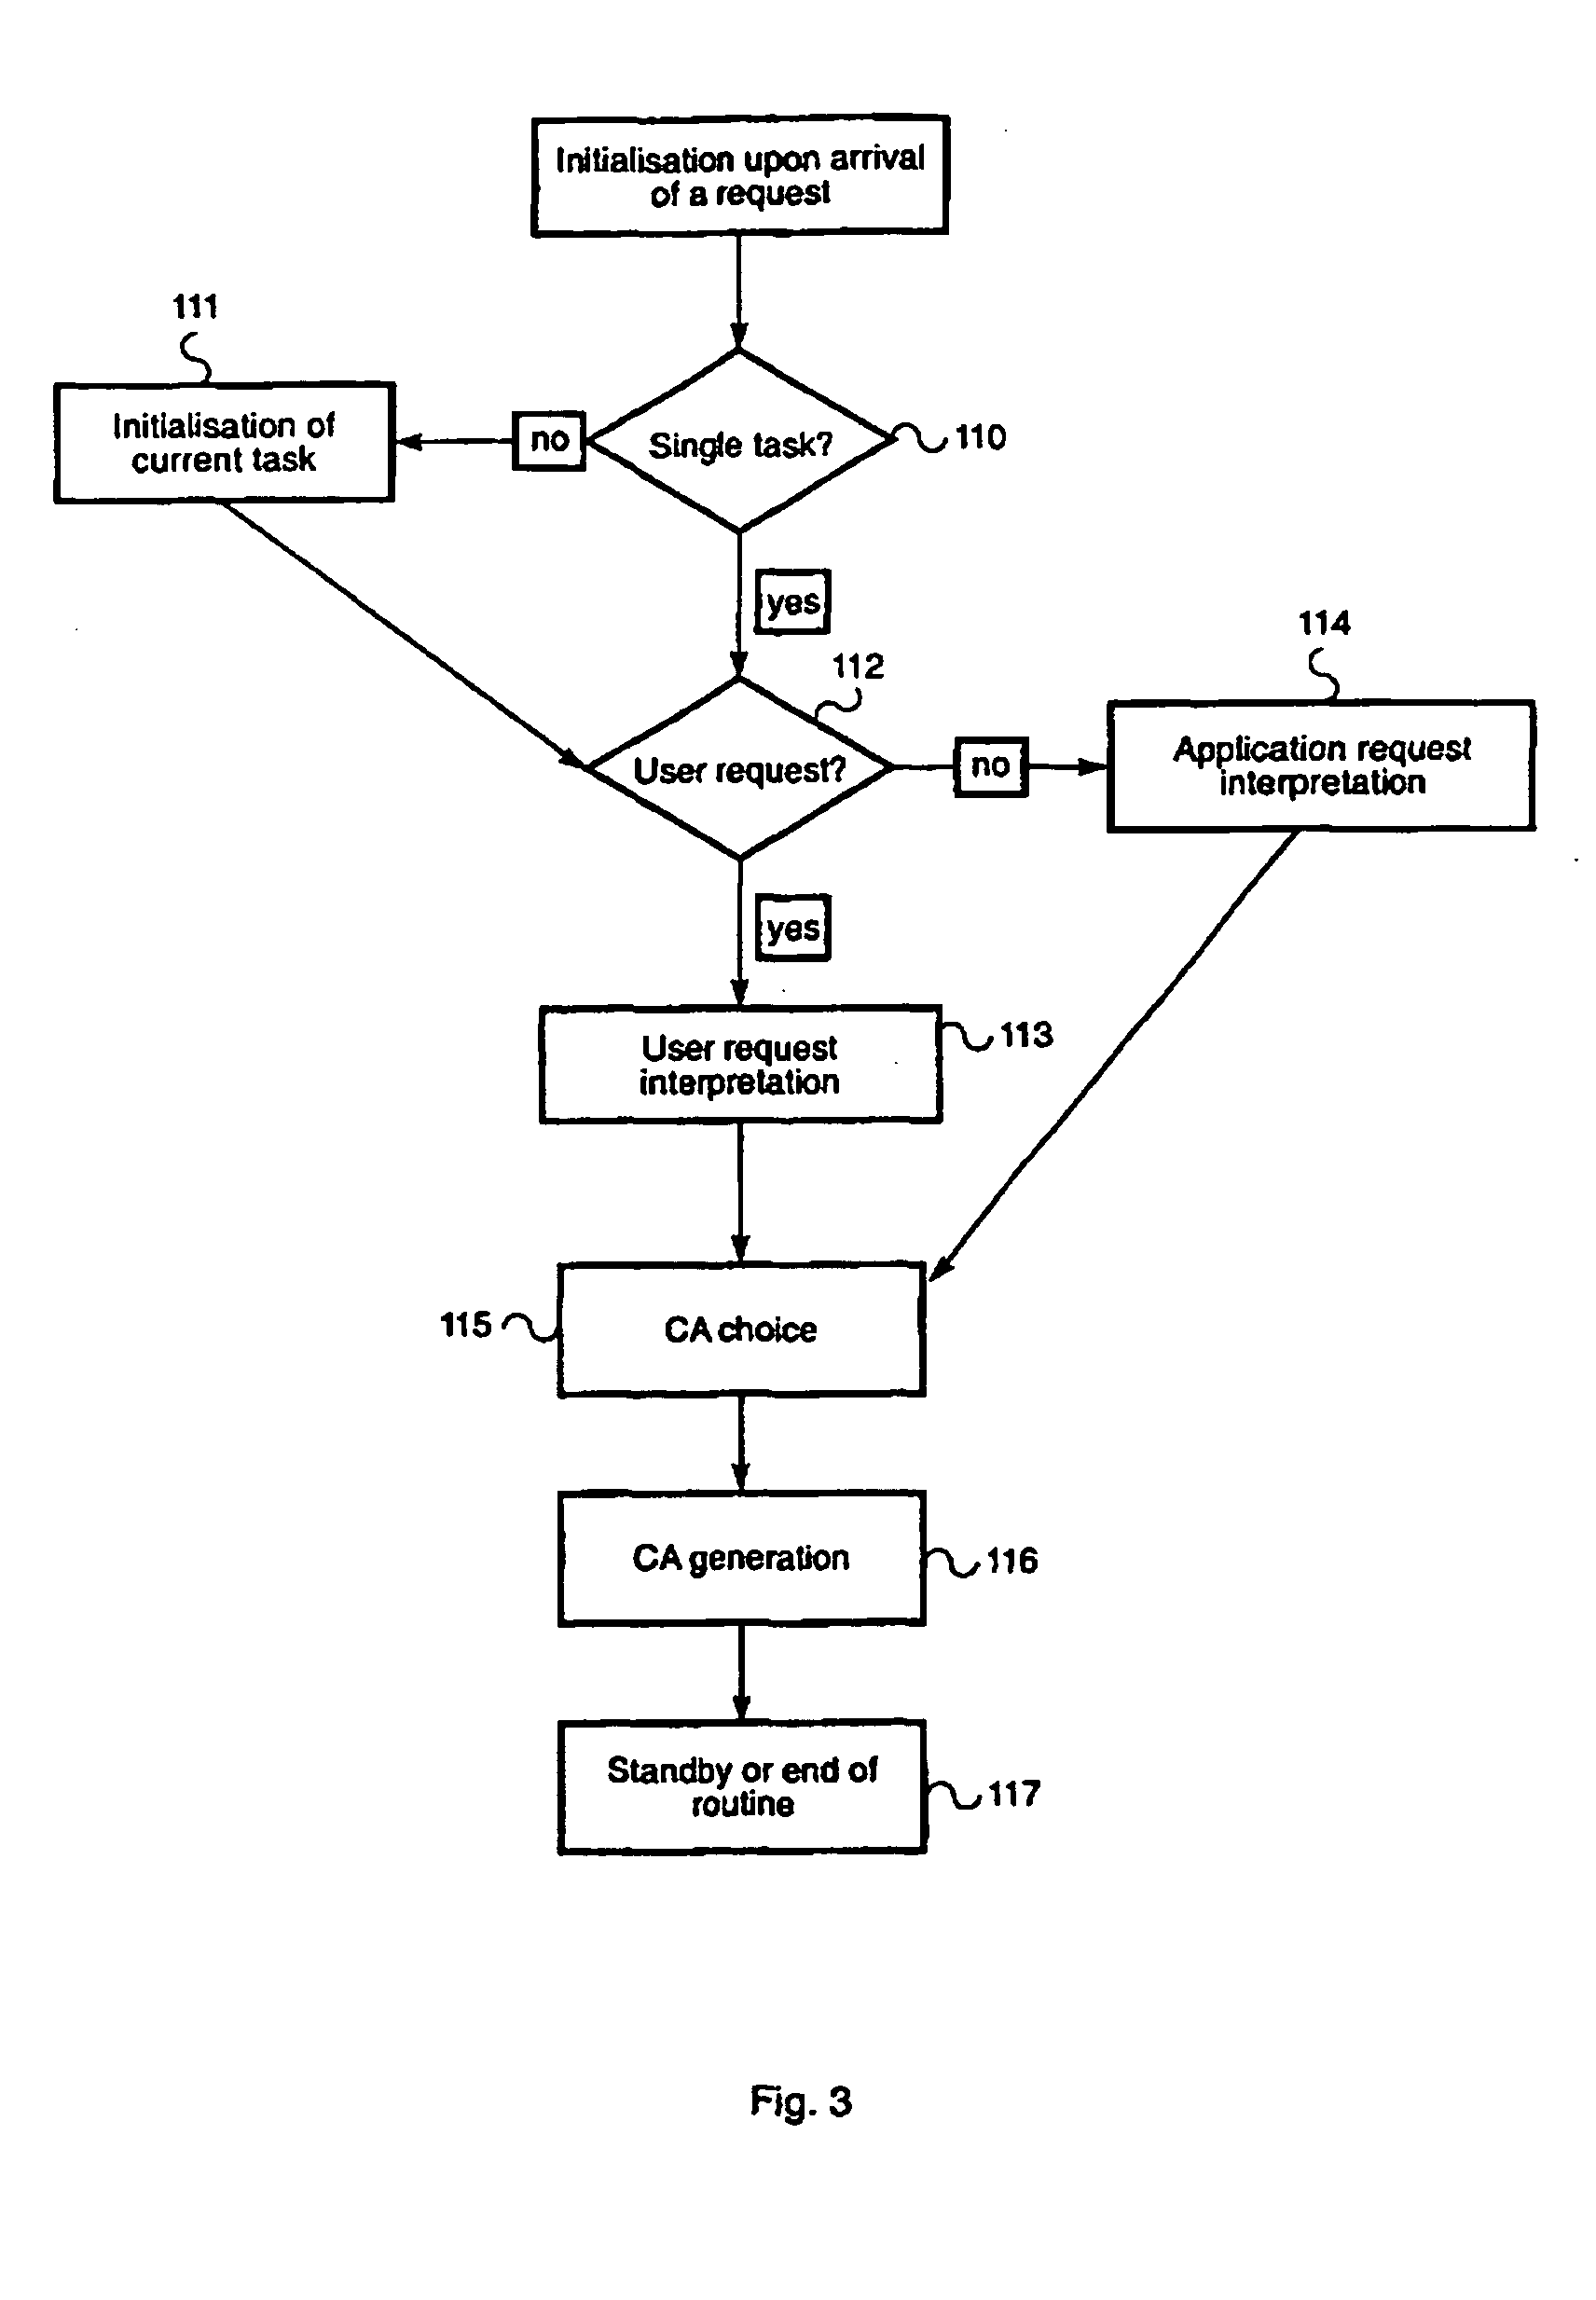 Method for managing mixed initiative human-machine dialogues based on interactive speech